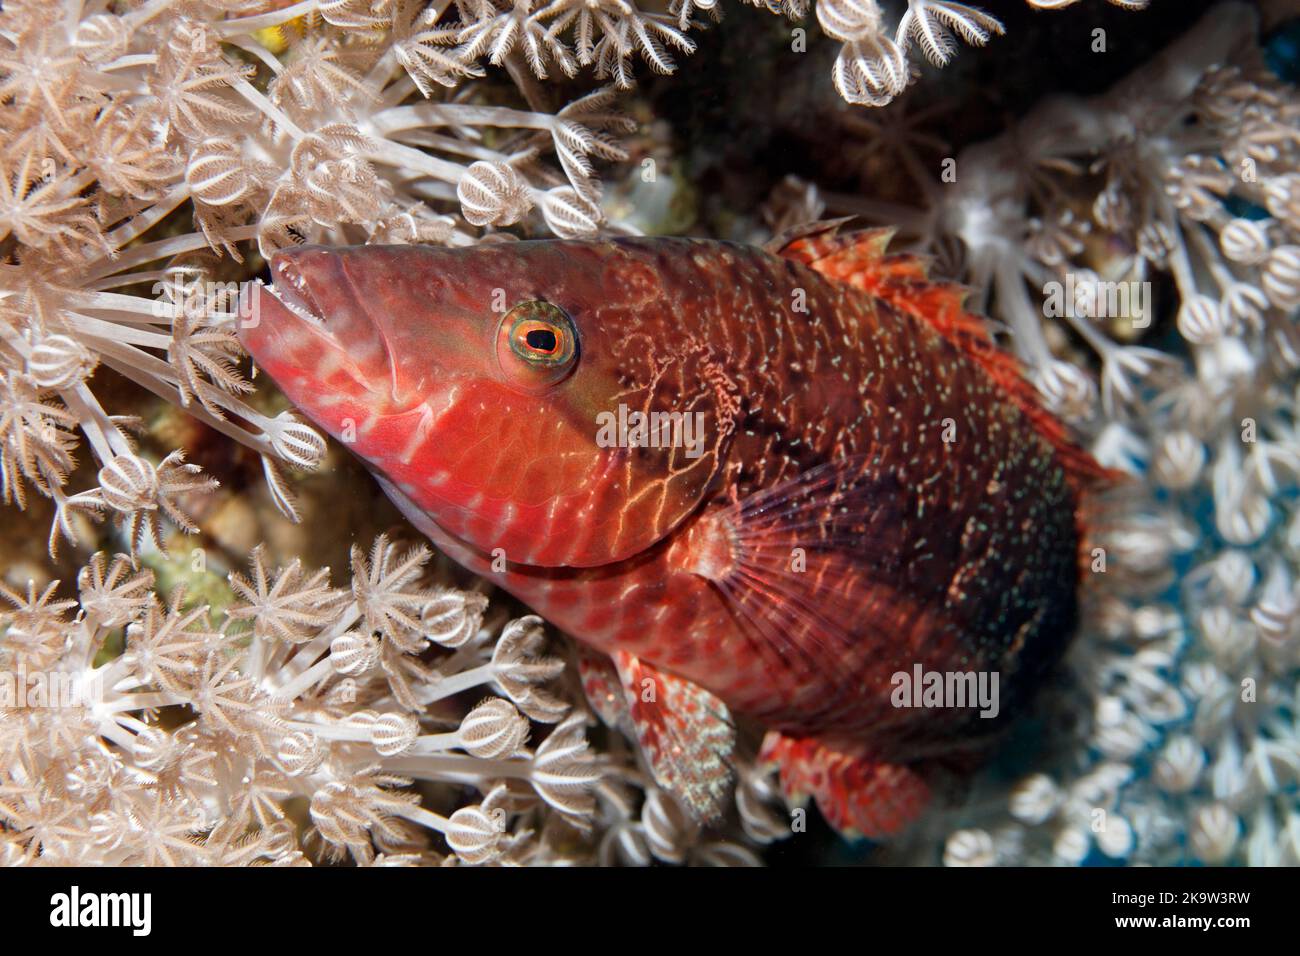 Cheek-lined wrasse (Oxycheilinus digramma) hiding in Xenia coral (Xenia sp.), Great Barrier Reef, Unesco World Heritage Site, Pacific Ocean, Australia Stock Photo